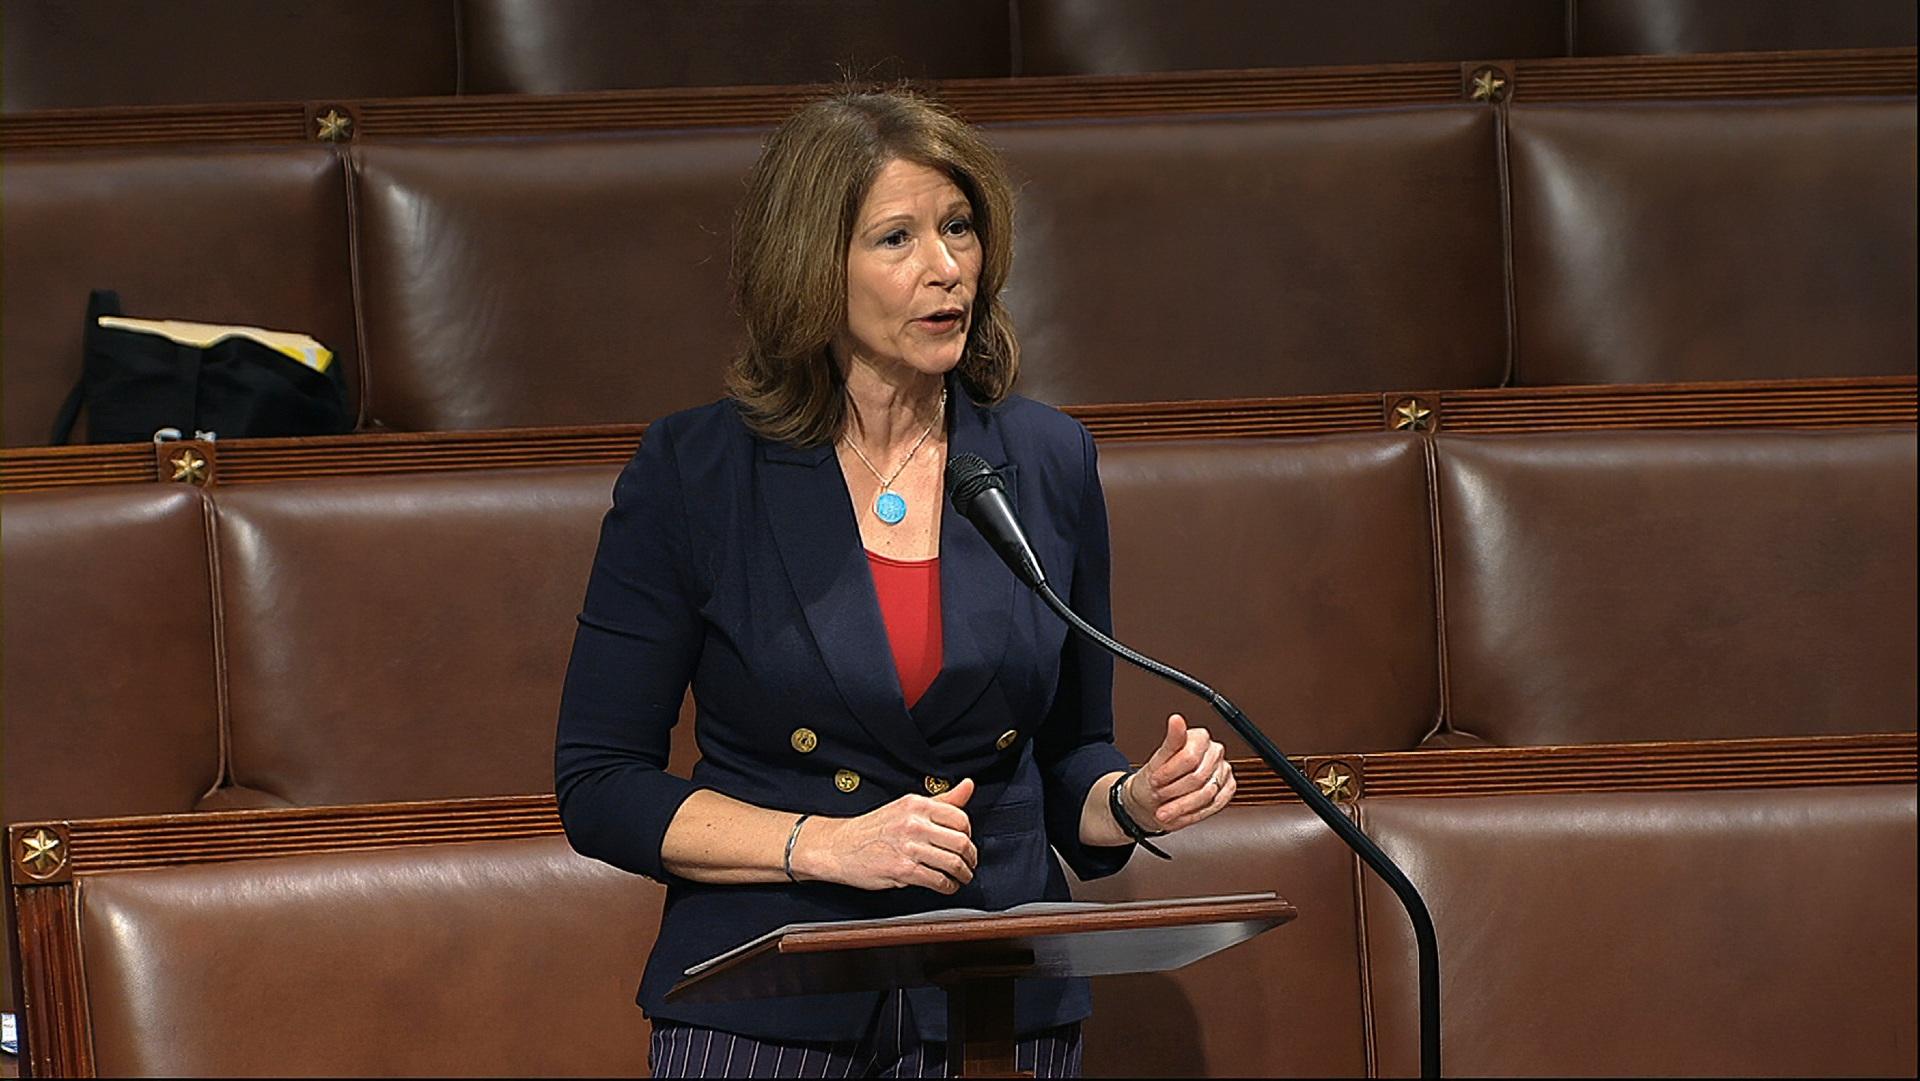 In this April 23, 2020, file image from video, Rep. Cheri Bustos, D-Ill., speaks on the floor of the House of Representatives at the U.S. Capitol in Washington. (House Television via AP, File)